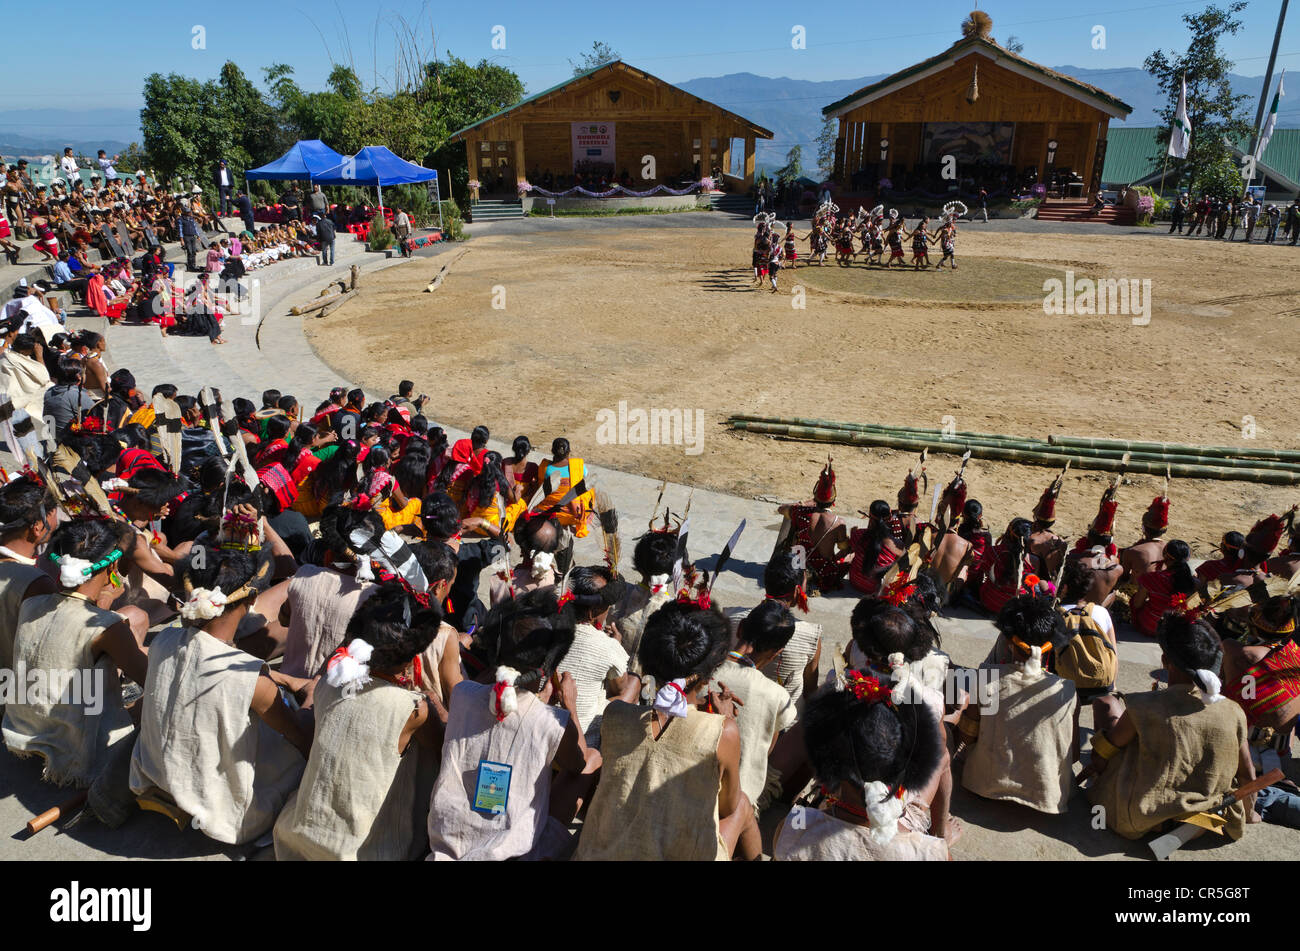 The tribes of Nagaland are displaying their customs and dances at the big showground of the Hornbill Festival, Nagaland, India Stock Photo